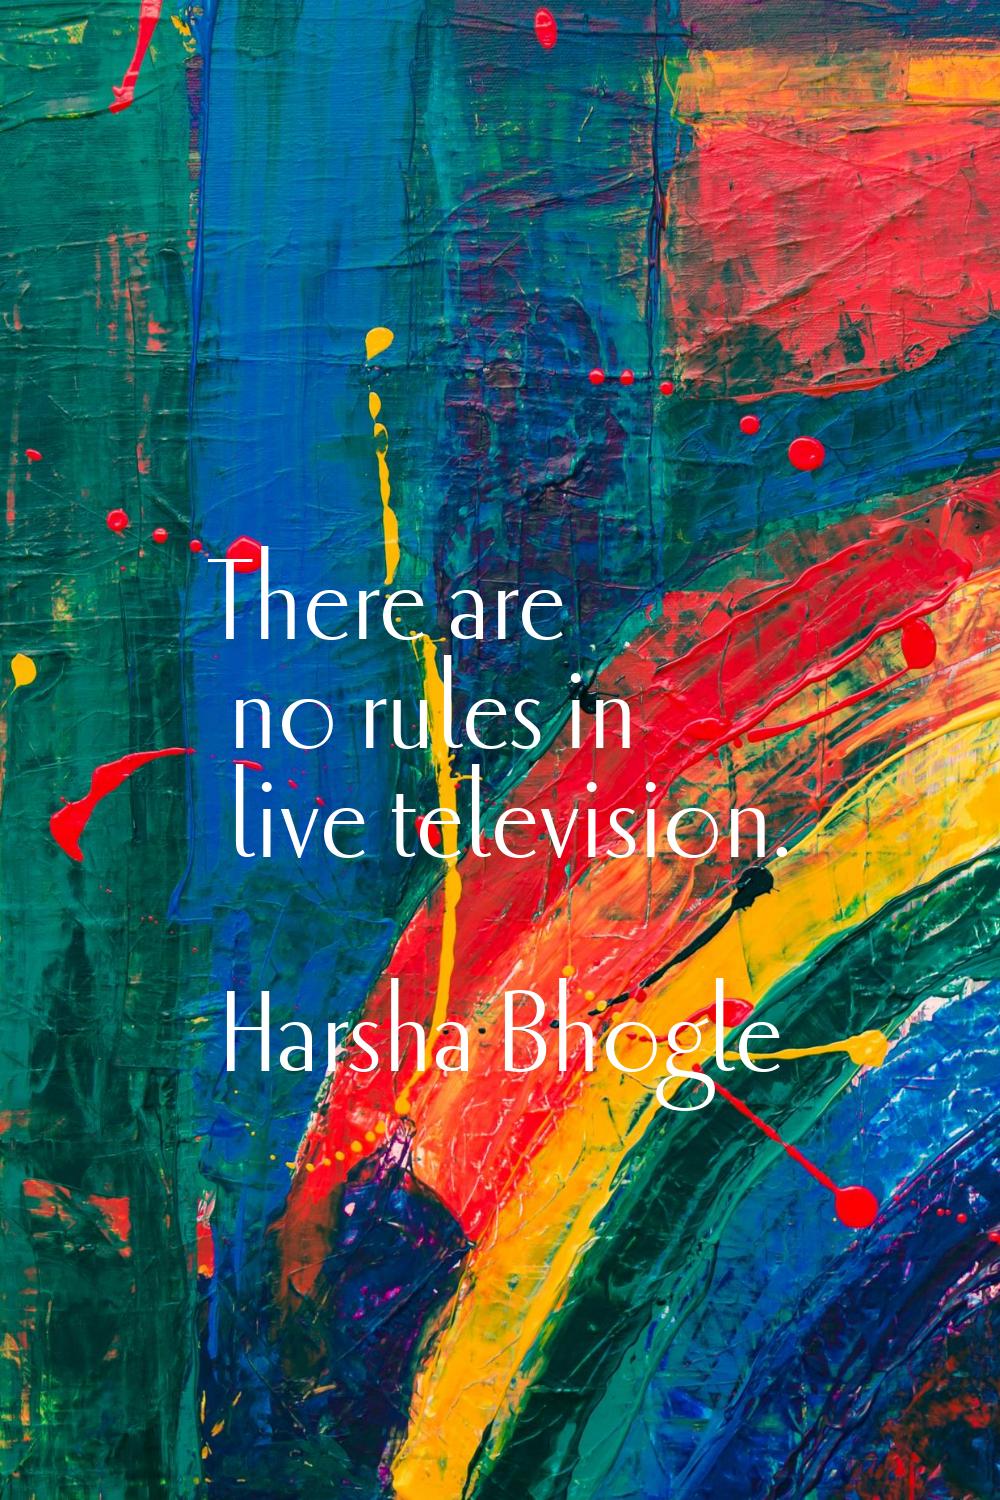 There are no rules in live television.